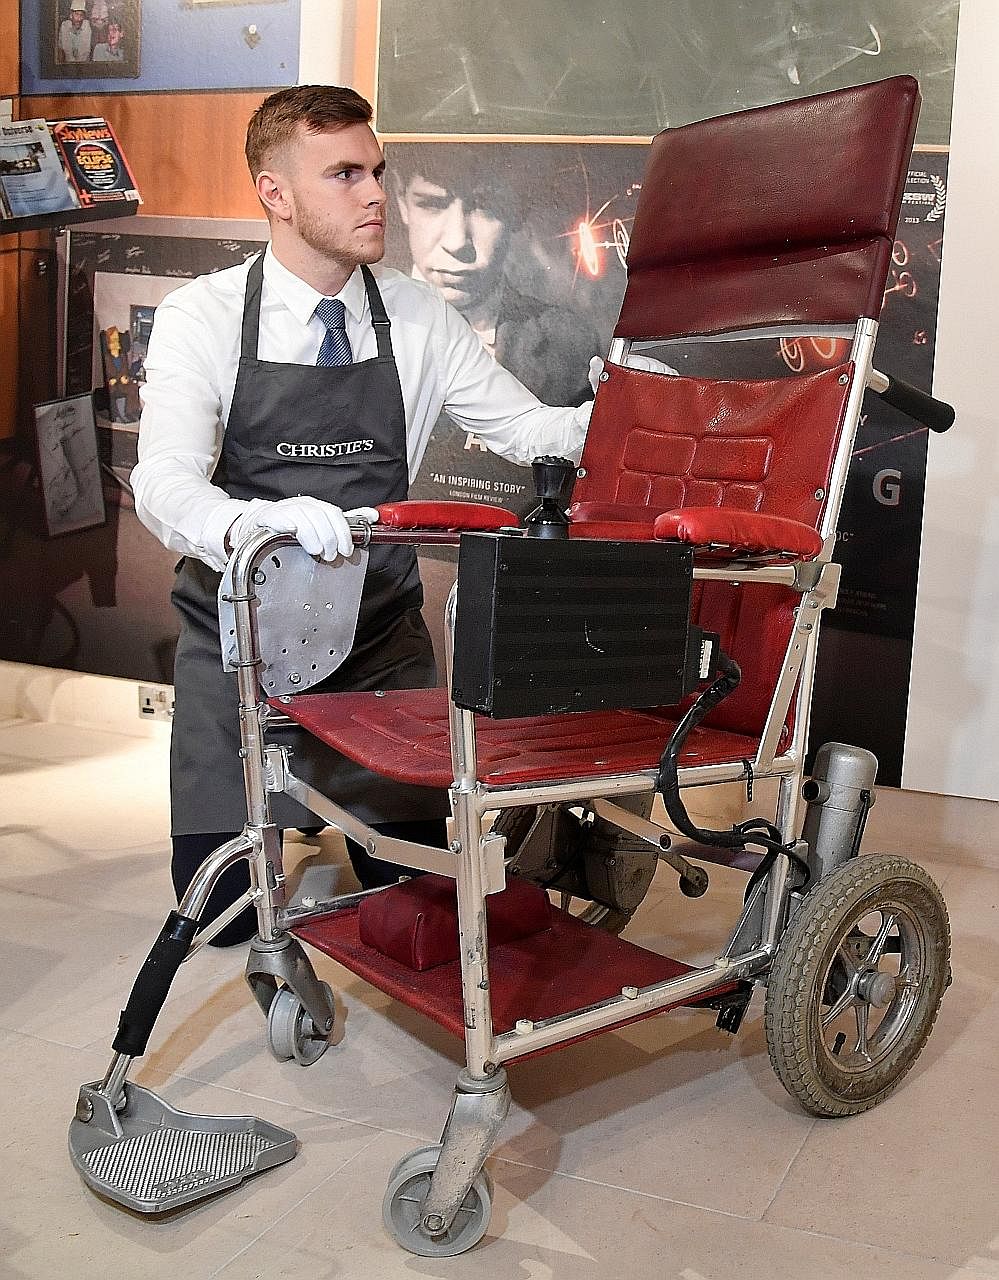 This motorised wheelchair used by British physicist Stephen Hawking, who died in March at the age of 76, was sold at auction for £296,750 (S$532,100).